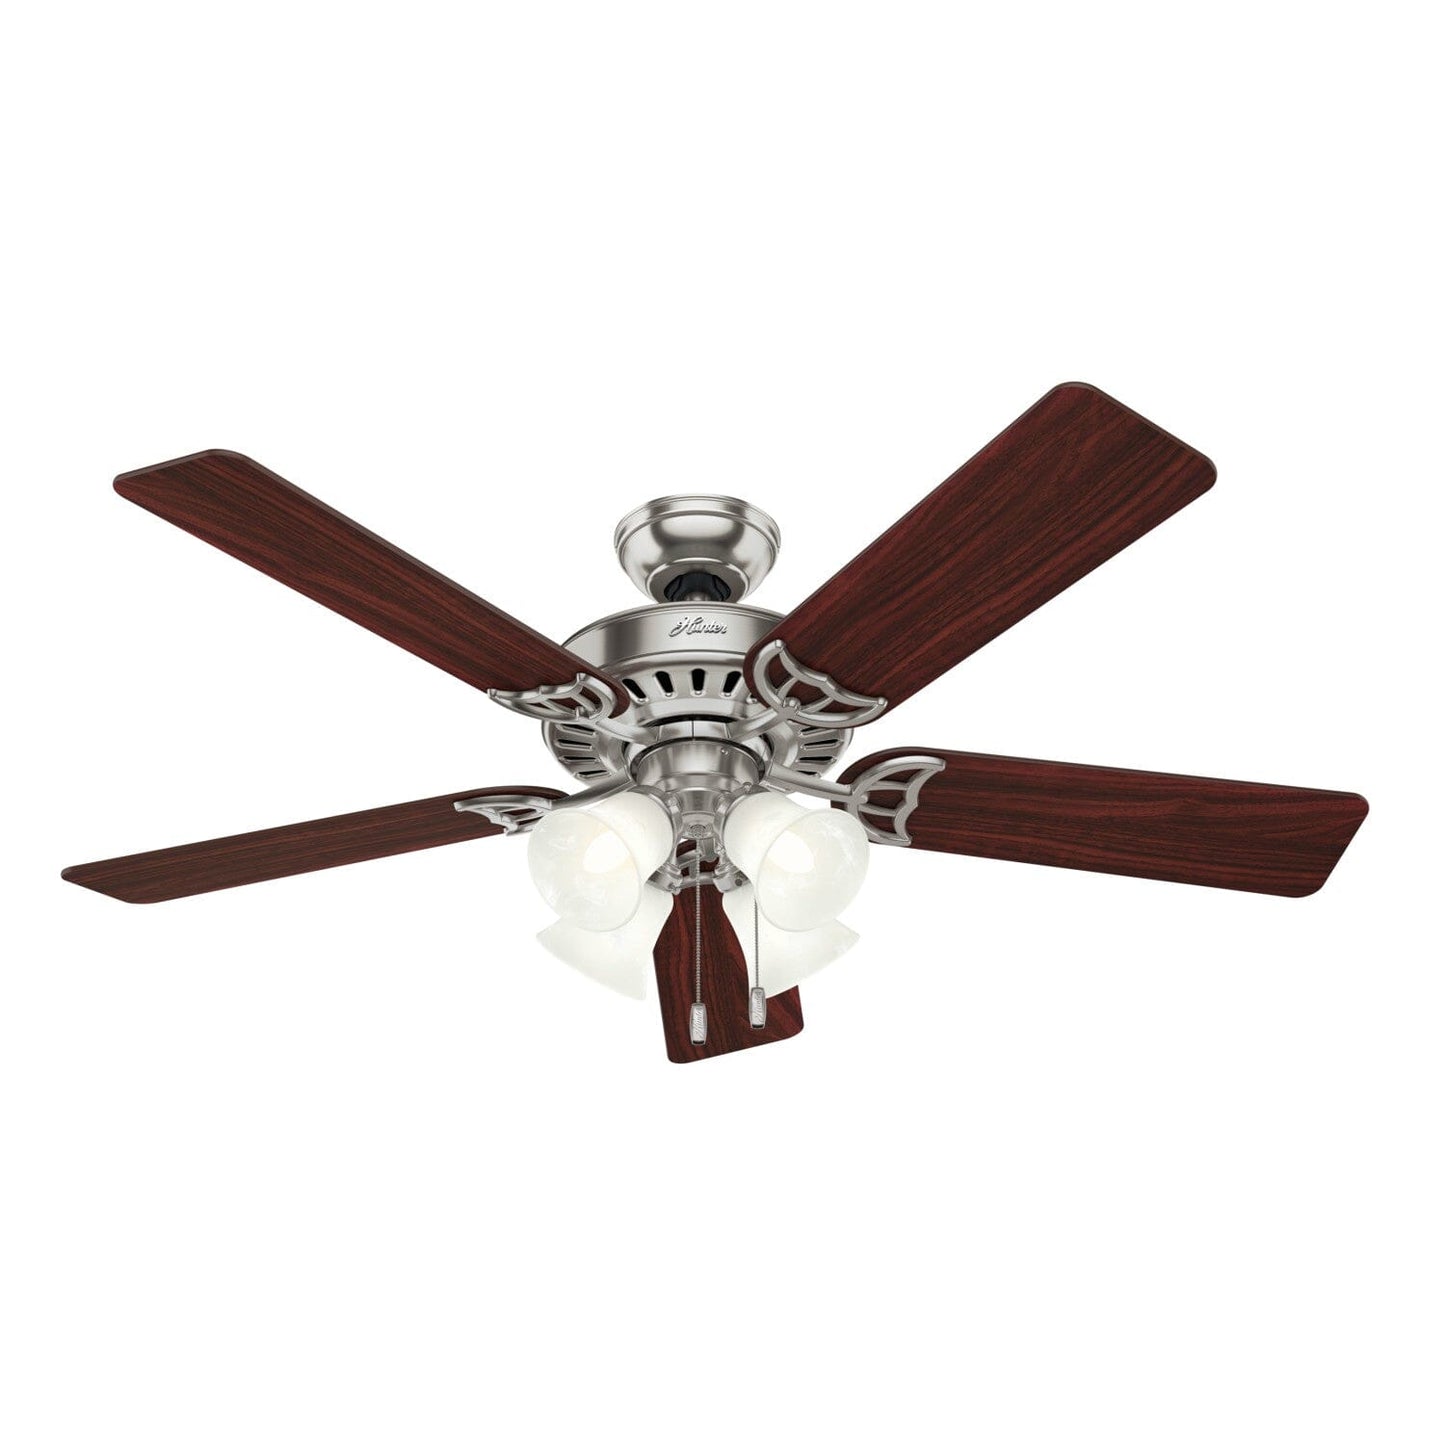 Studio Series with 4 Lights 52 inch Ceiling Fans Hunter Brushed Nickel - Cherry 